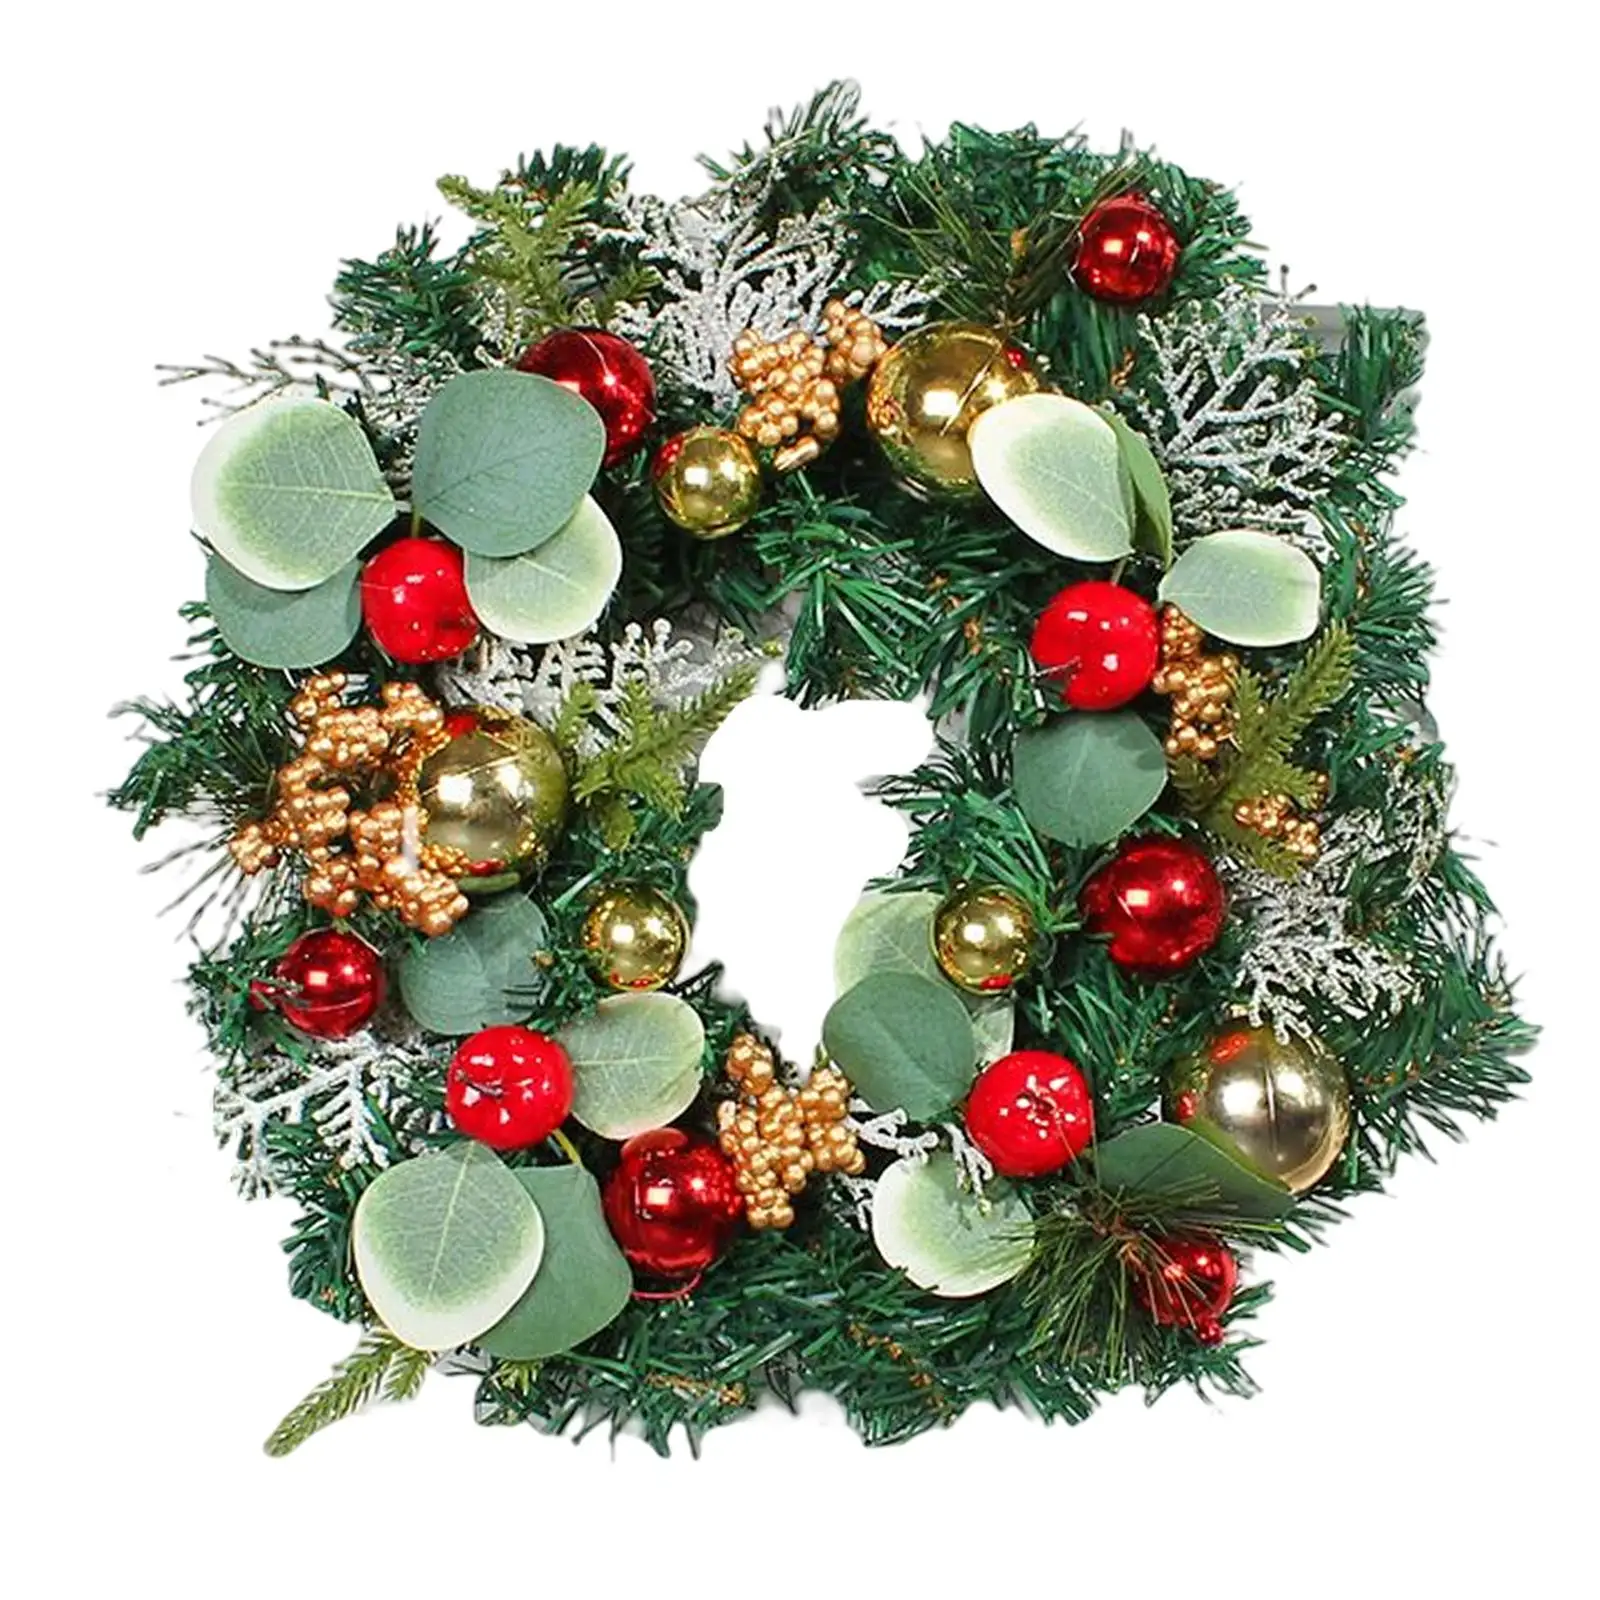 Christmas Wreath Garland decor Hanging Winter Wreath Christmas Decoration for Fireplace Outdoor Indoor Celebration Festival